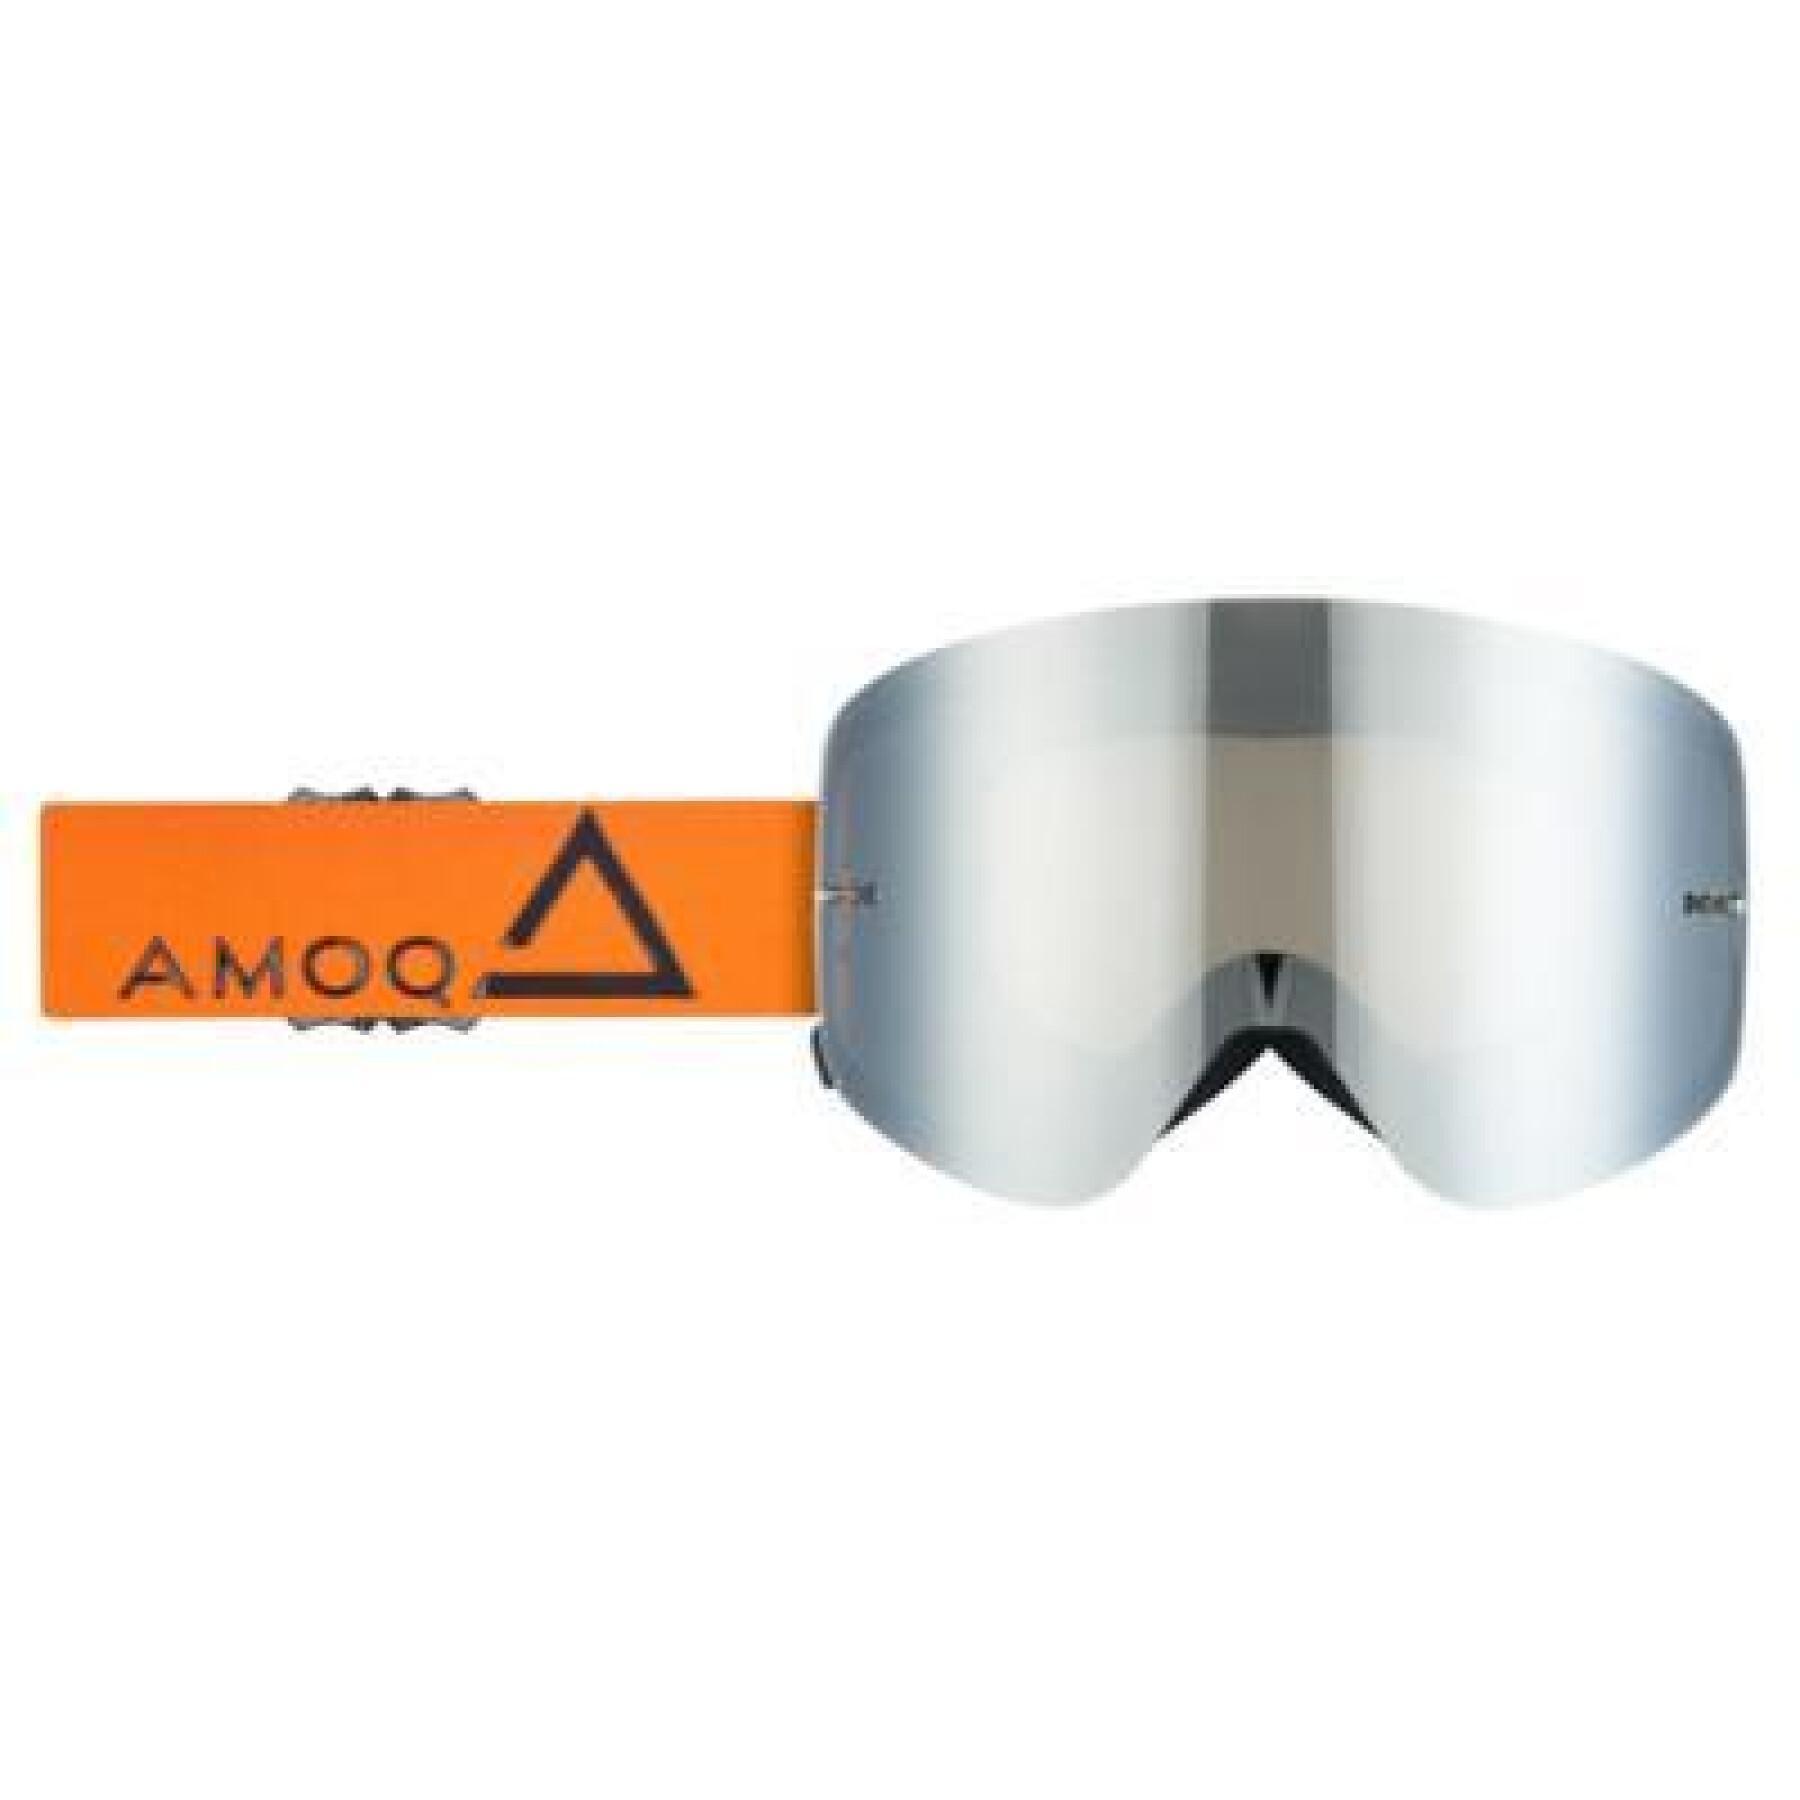 Motorcycle cross goggles with silver mirror lens Amoq Vision Magnetic